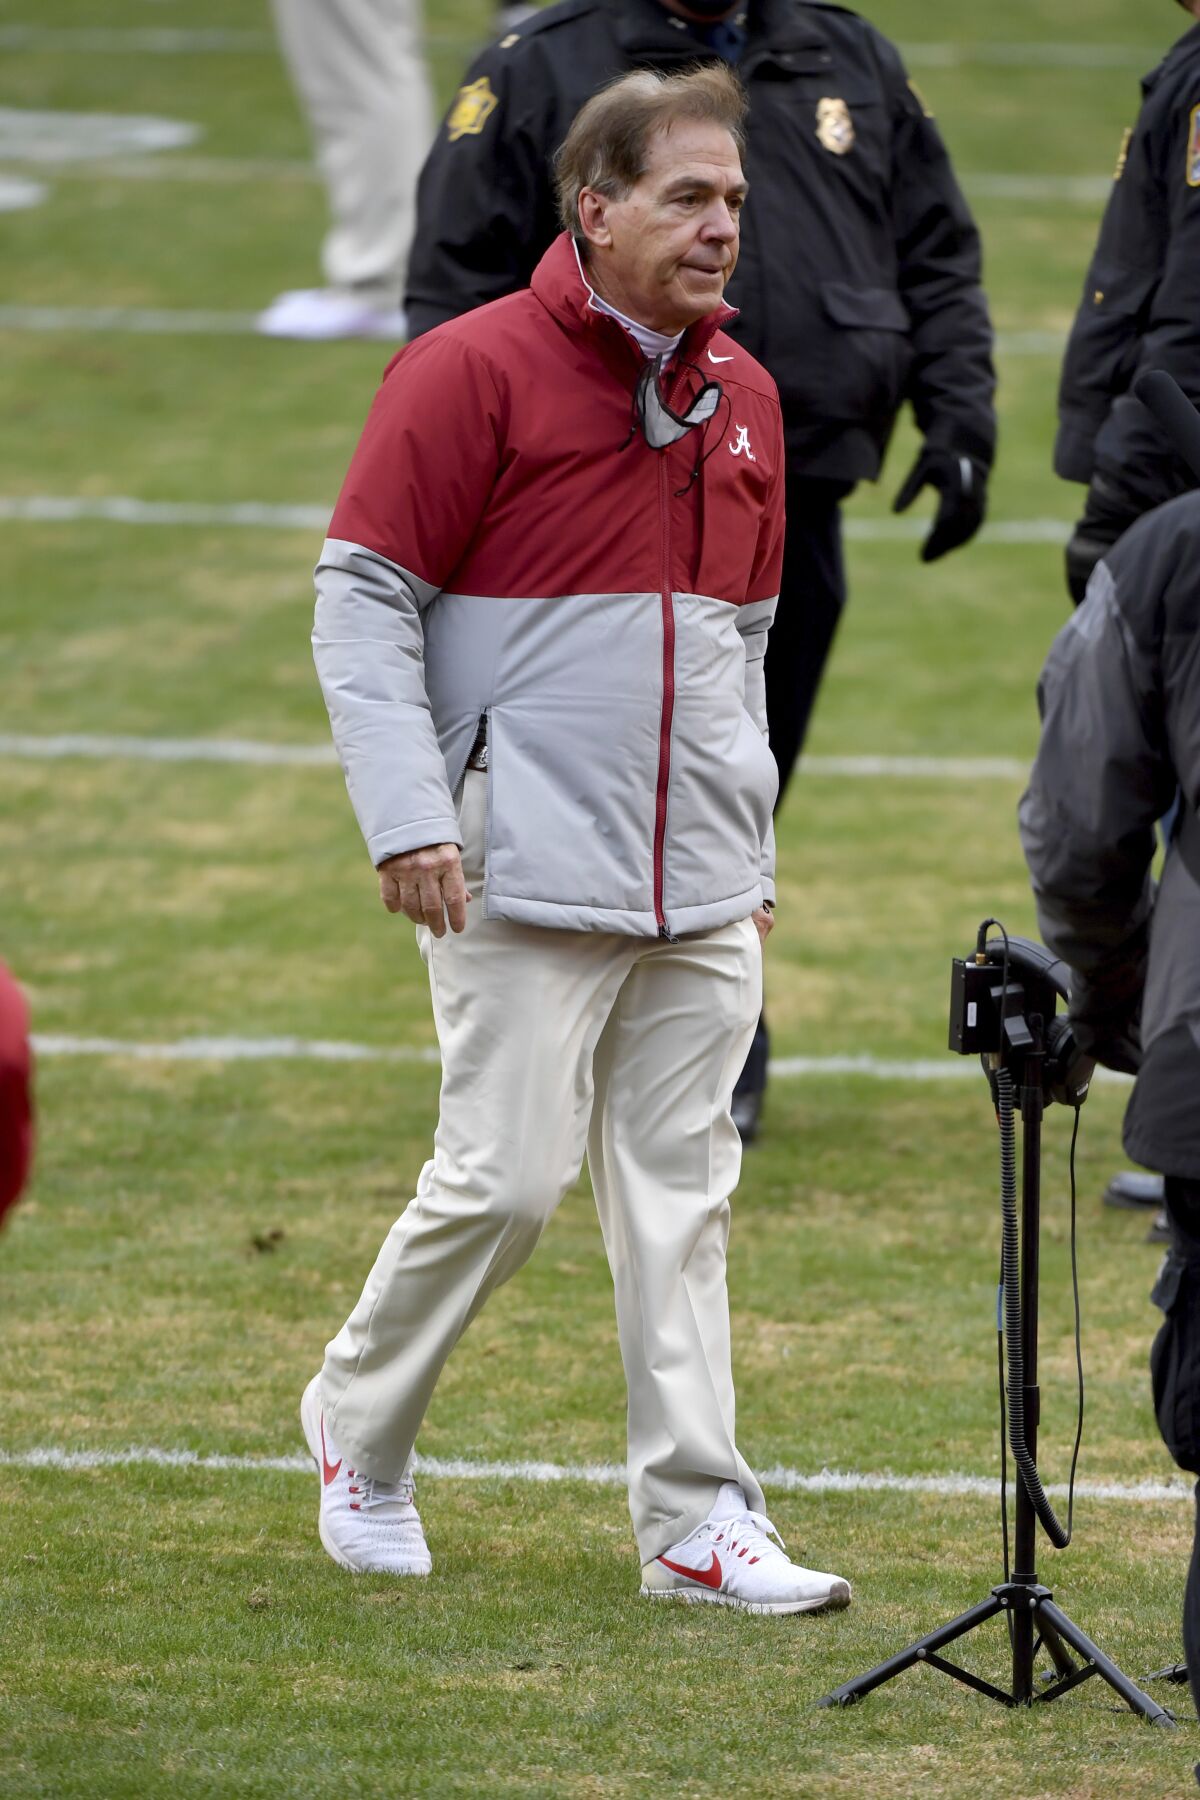 Alabama coach Nick Saban heads off the field following Alabama's 52-3 win over Arkansas in an NCAA college football game Saturday, Dec. 12, 2020, in Fayetteville, Ark. (AP Photo/Michael Woods)